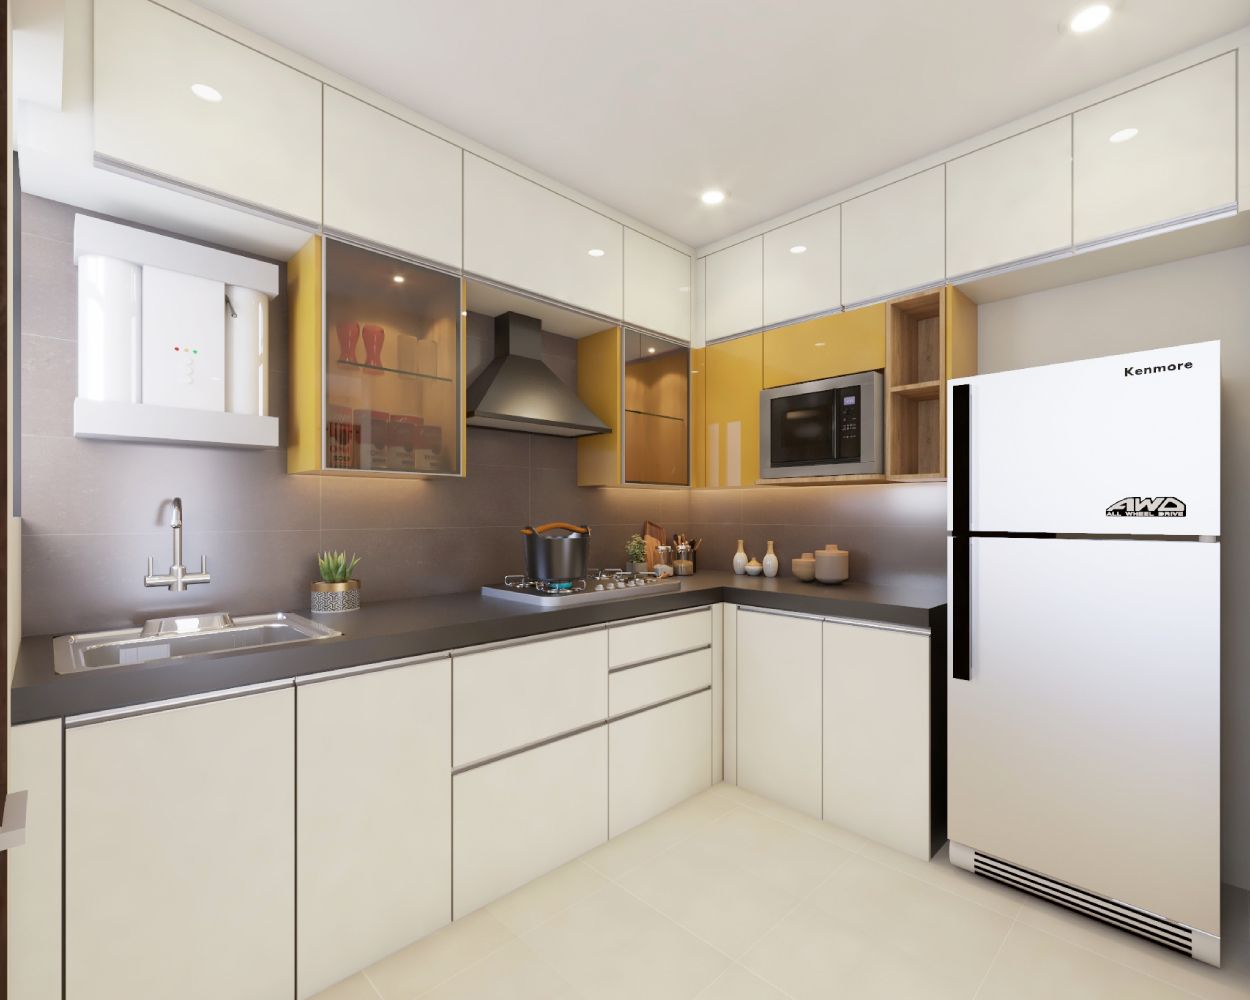 Modern Modular L Shape Kitchen Design In Champagne And Solar Yellow Tones